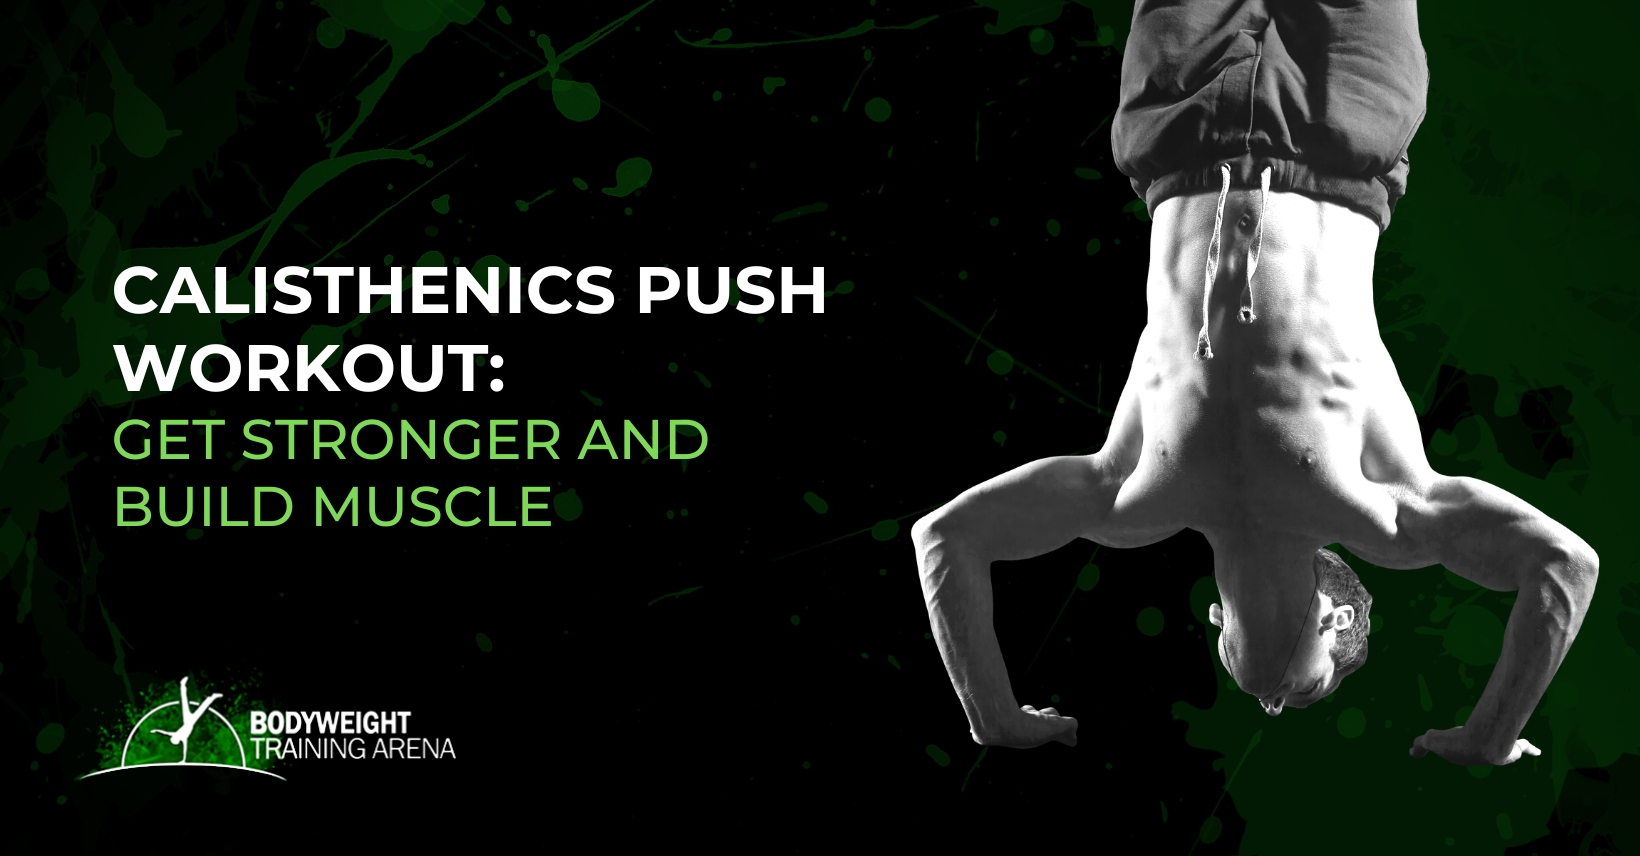 Calisthenics Push Workout: Get Stronger and Build Muscle